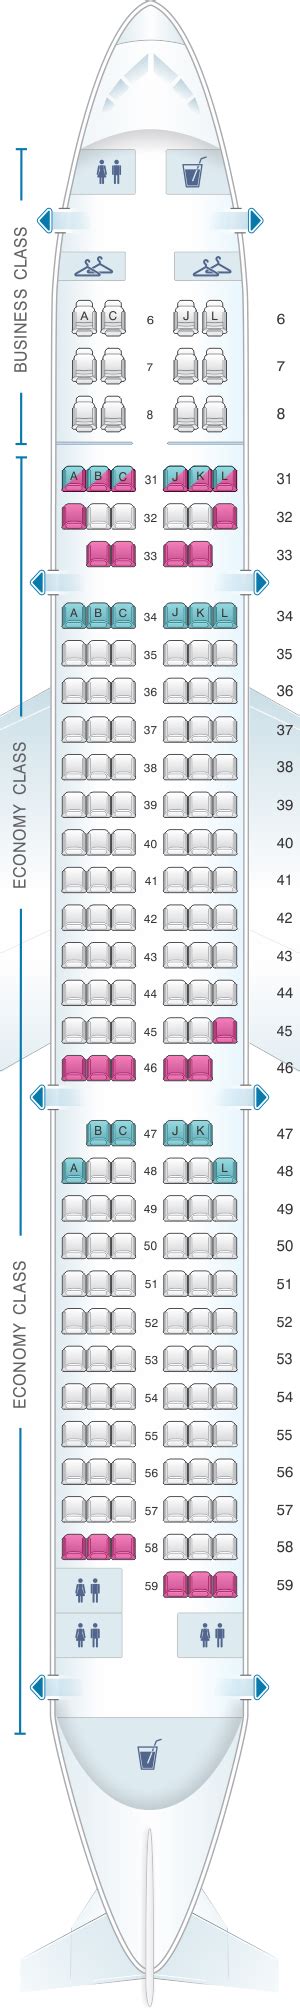 Seat Map China Eastern Airlines Airbus A321 200 178pax Seatmaestro